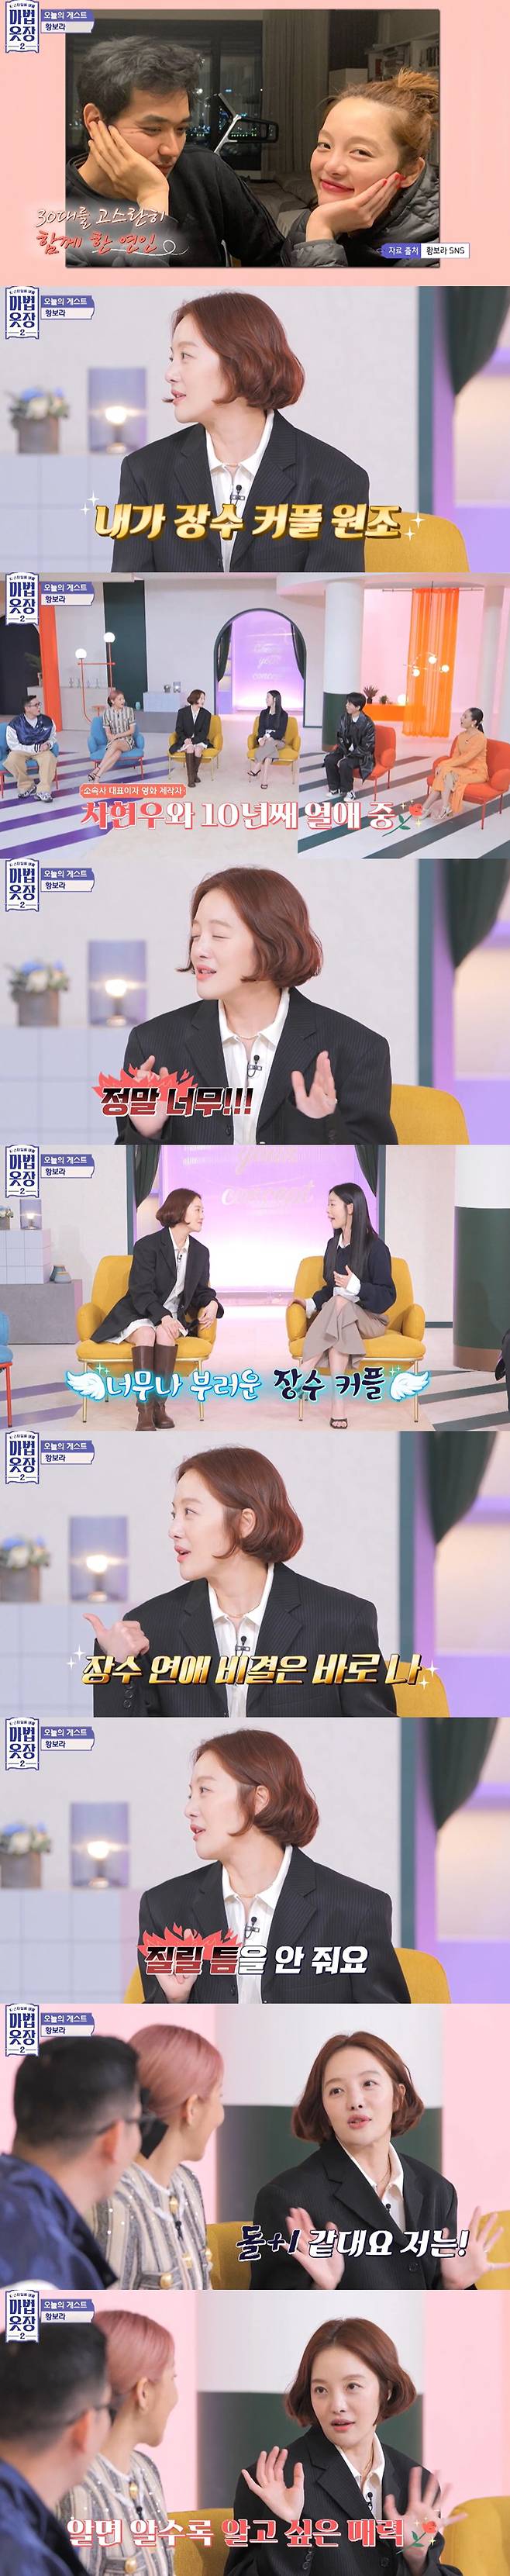 Actor Hwang Bo Ra has revealed his willingness to marry within the year.Hwang Bo Ra appeared in the JTBC entertainment program magic closet broadcast on the 19th and talked.When Hwang Bo Ra said, We are the longevity couple, and this is the 10th year of this year. I met my brother at the age of 30 and it was 10 years.I could not say, he laughed.Han Seon-hwa asked, If you see longevity couples, I am excited and envious. Do you have a secret to maintaining? Hwang Bo Ra said, The secret of longevity is me.I dont give a break. Its not the same. Its like a stone child. Haru is like a quarry, Haru is scared.My brother says, You are like an onion woman. Hwang Bo Ras Hope 7DAYS schedule was released, and Hwang Bo Ra attracted attention by writing interview and proposal on the schedule.When MCs asked, Are you having a meeting? Hwang Bo Ra explained, I will go to the wedding this year, and I have made a schedule with the will to go.When asked, What kind of proposal do you want?, Hwang Bo Ra said, I hate being together the most. I want to go on honeymoon together.I was surprised to see that I was look and wear in purple.Hwang Bo Ra also said that he would like to go on a Double Jeopardy date with Sooyoung and Jung Kyoung-ho couples as a wish.Hwang Bo Ra said, I want to go on a golf double jeopardy date with Jung Kyoung-ho and Sooyoung. Are you two famous entertainment longevity couple?I thought it would be fun to be together. If you do not like it, you can not help it. The doctors have not asked yet. On the other hand, Hwang Bo Ra is openly devoted to Cha Hyeon-woo, the second son of actor Kim Yong-gun and his younger brother Ha Jung-woo.